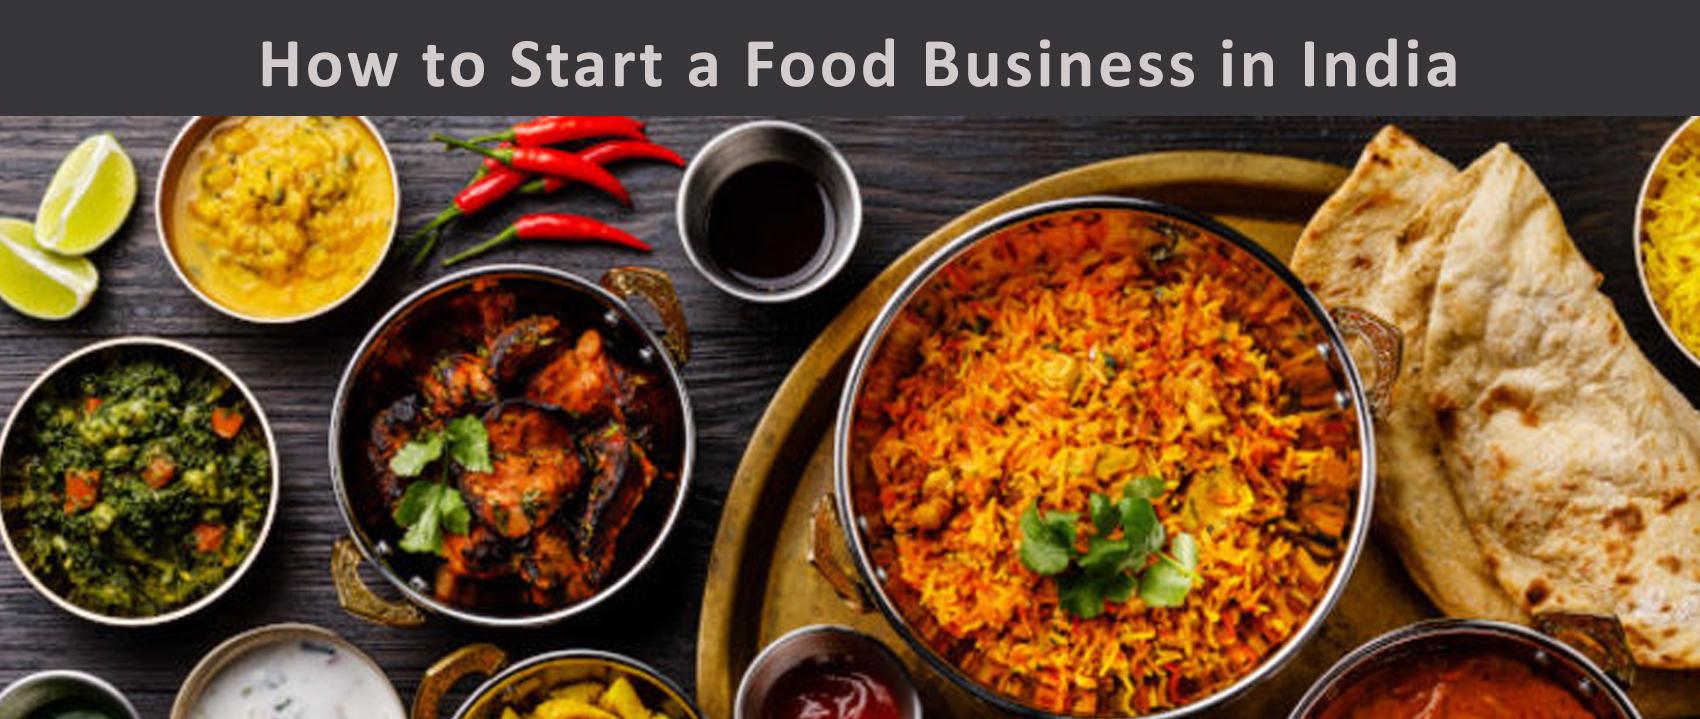 How to Start and Grow a Food Business in India